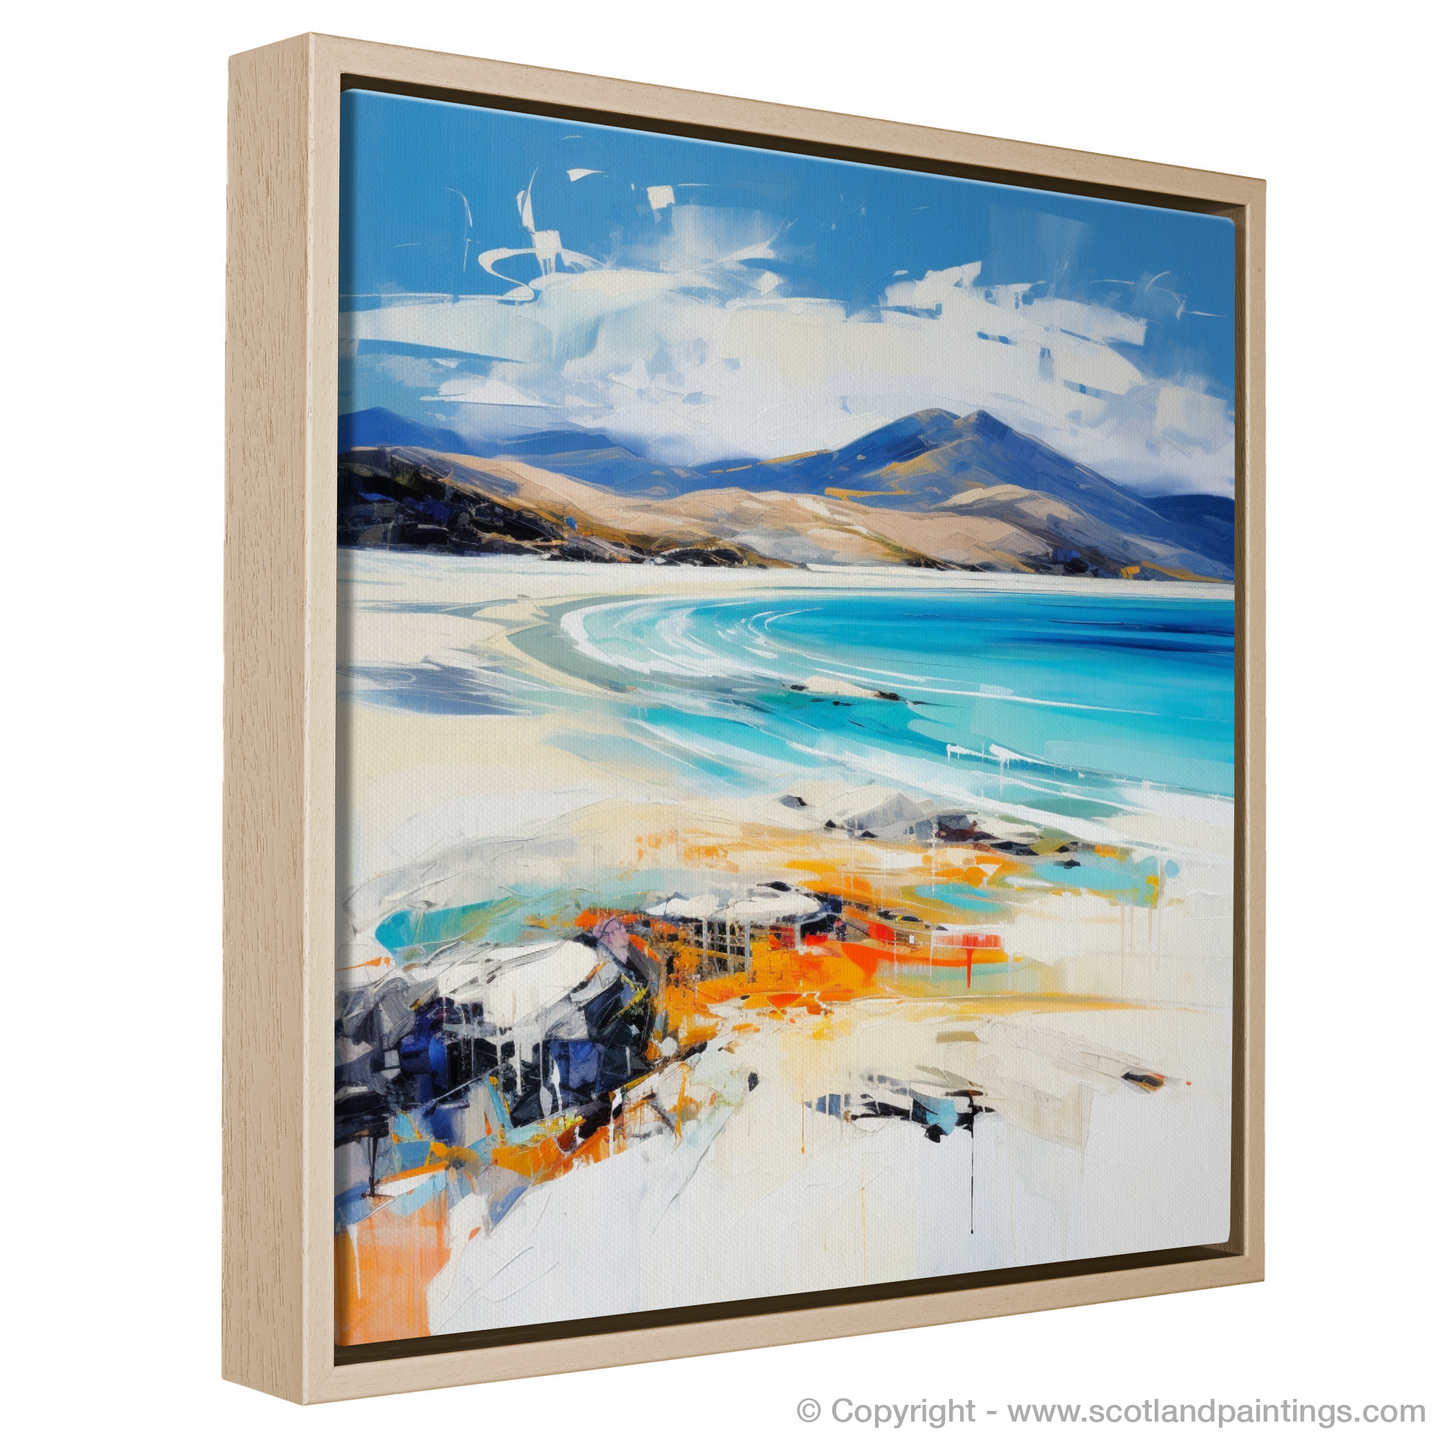 Painting and Art Print of Luskentyre Beach, Isle of Harris entitled "Luskentyre Beach: An Expressionist Ode to Scotland's Seascape".